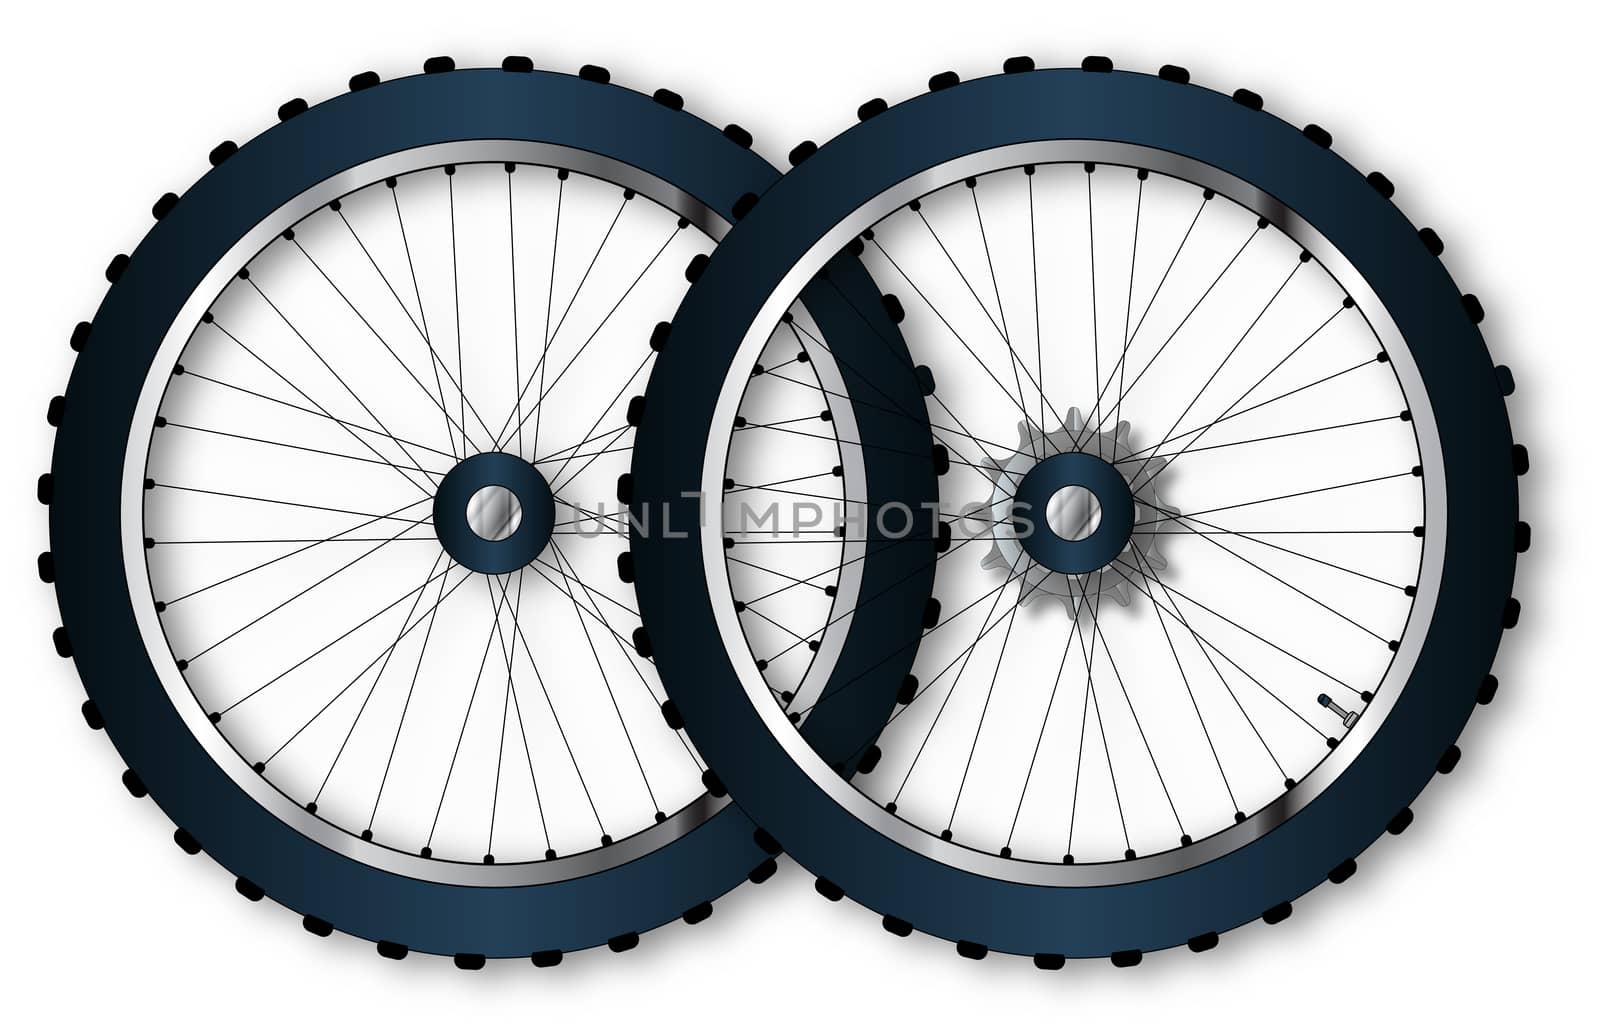 A pair of knobly tyres from a bicycle wheel with driving gear valve and spoke nipples.